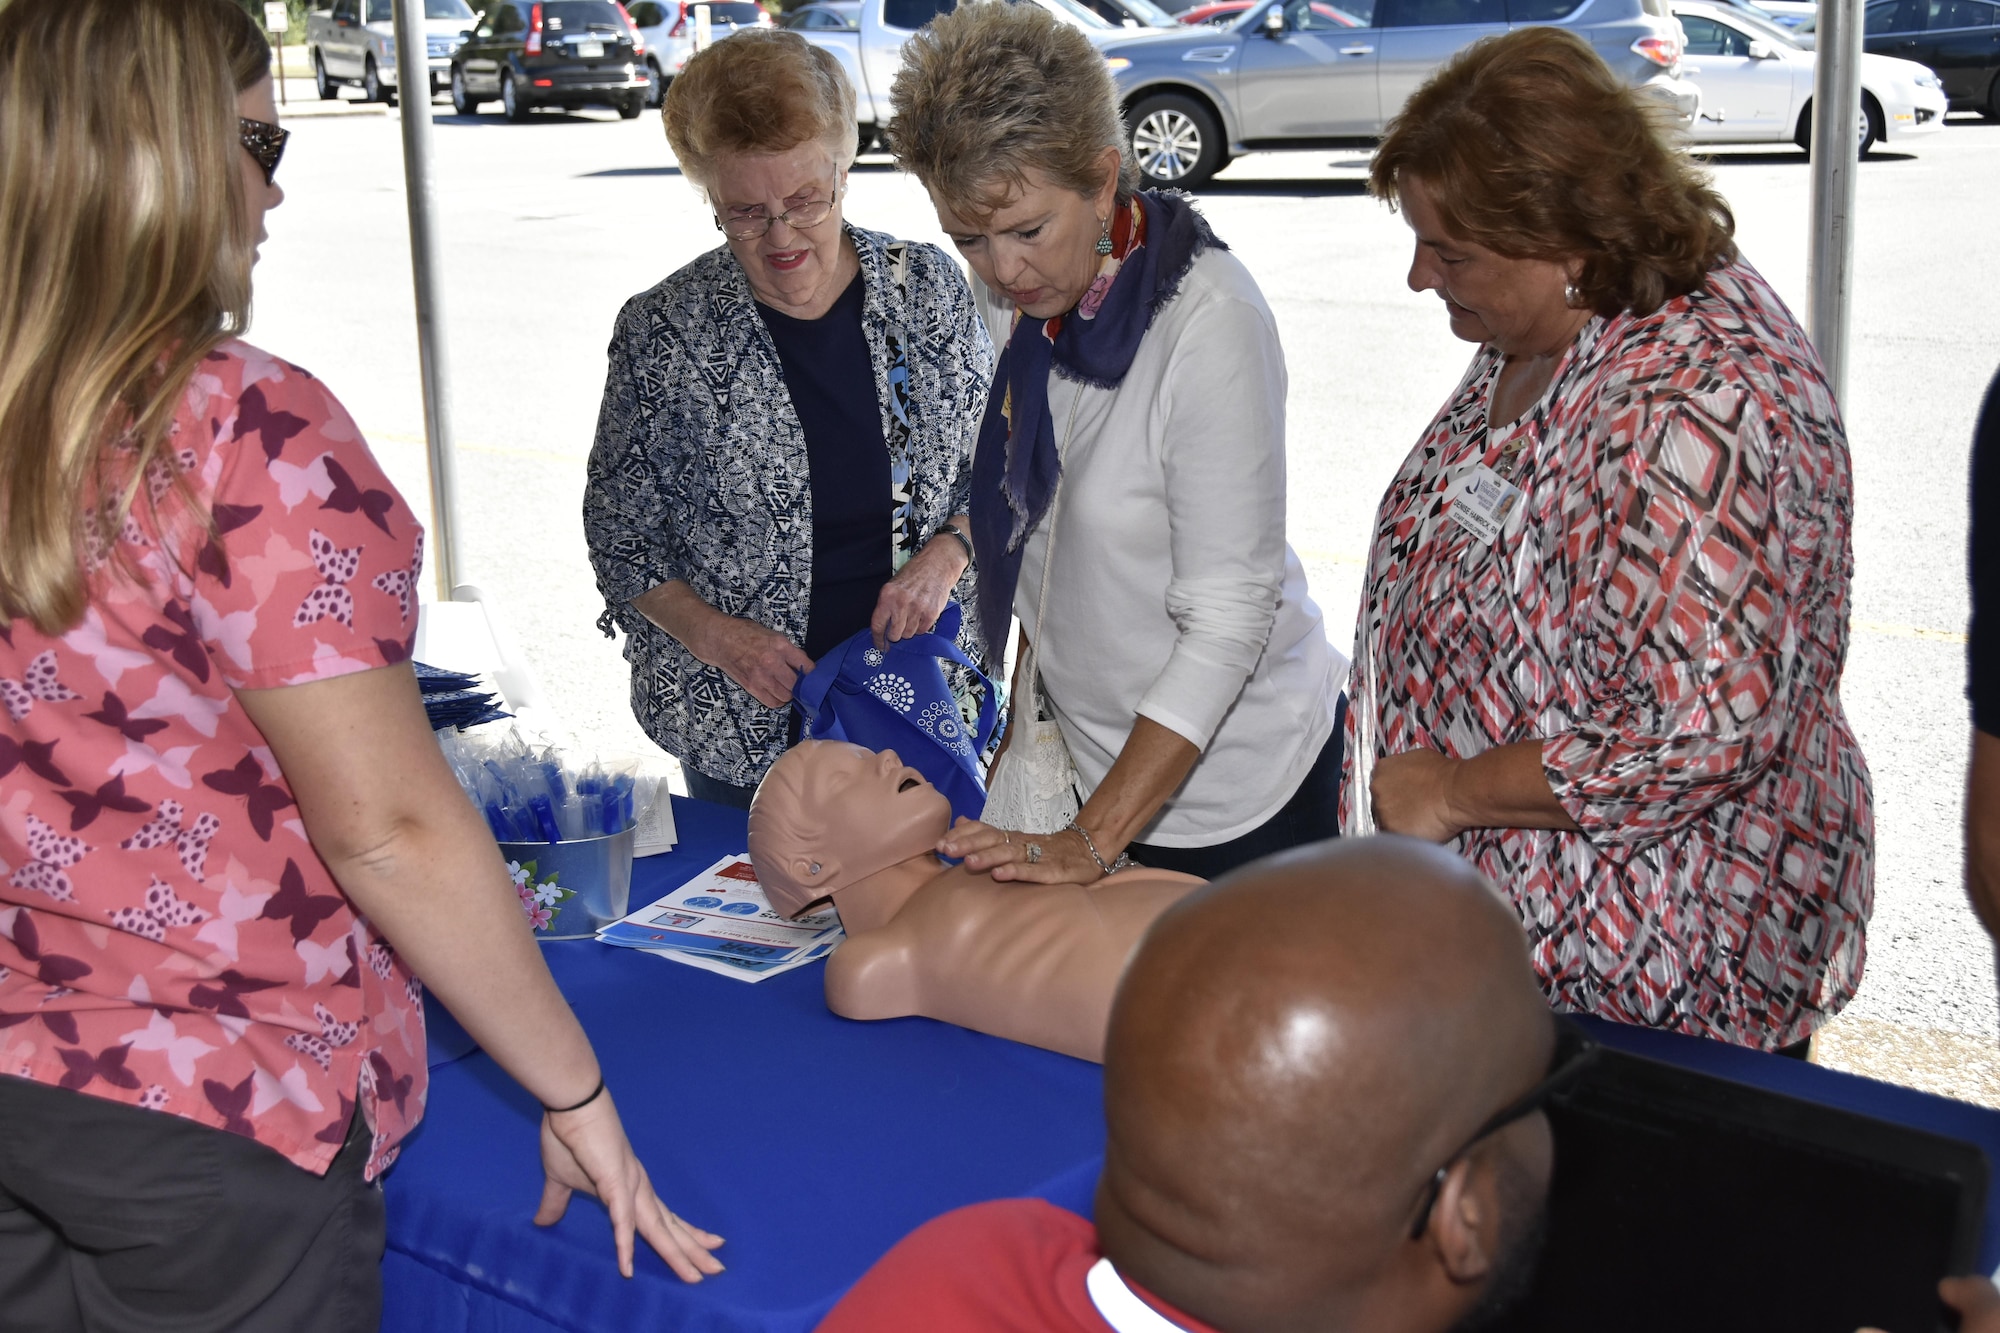 Participants at the Arnold Air Force Base Community Health Fair Sept. 29, experience the feel of administering CPR through one of the exhibitors. The health fair was hosted by the Arnold AFB Medical Aid Station. Health and Safety professionals were on hand to talk about diabetes, ergonomics, dental health, tobacco cessation, heart disease, physical therapy, nutrition, emergency preparation and fire extinguisher safety from the Arnold AFB Fire Department. (U.S. Air Force photo/Rick Goodfriend)